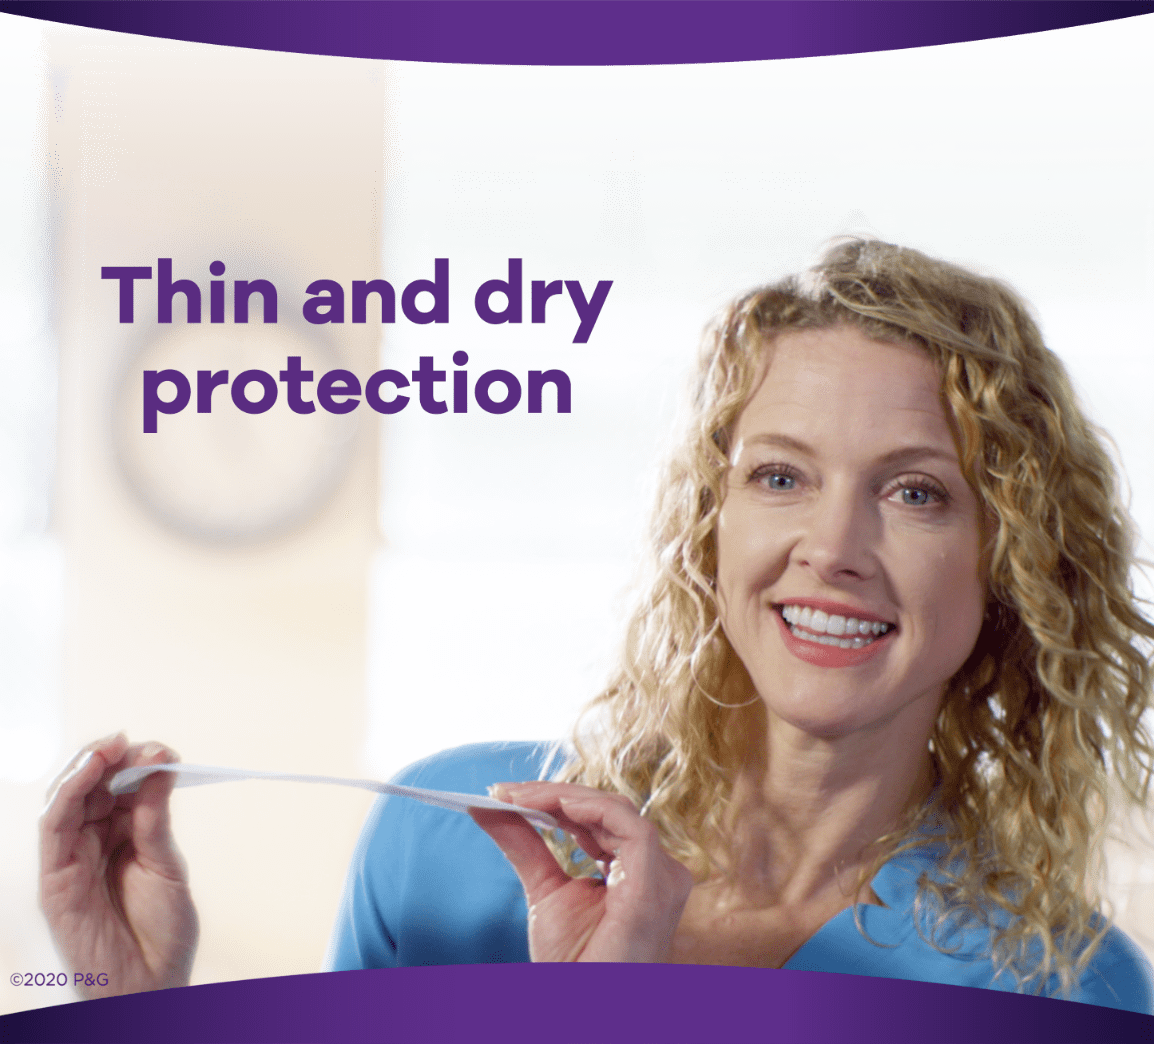 Thin and dry protection